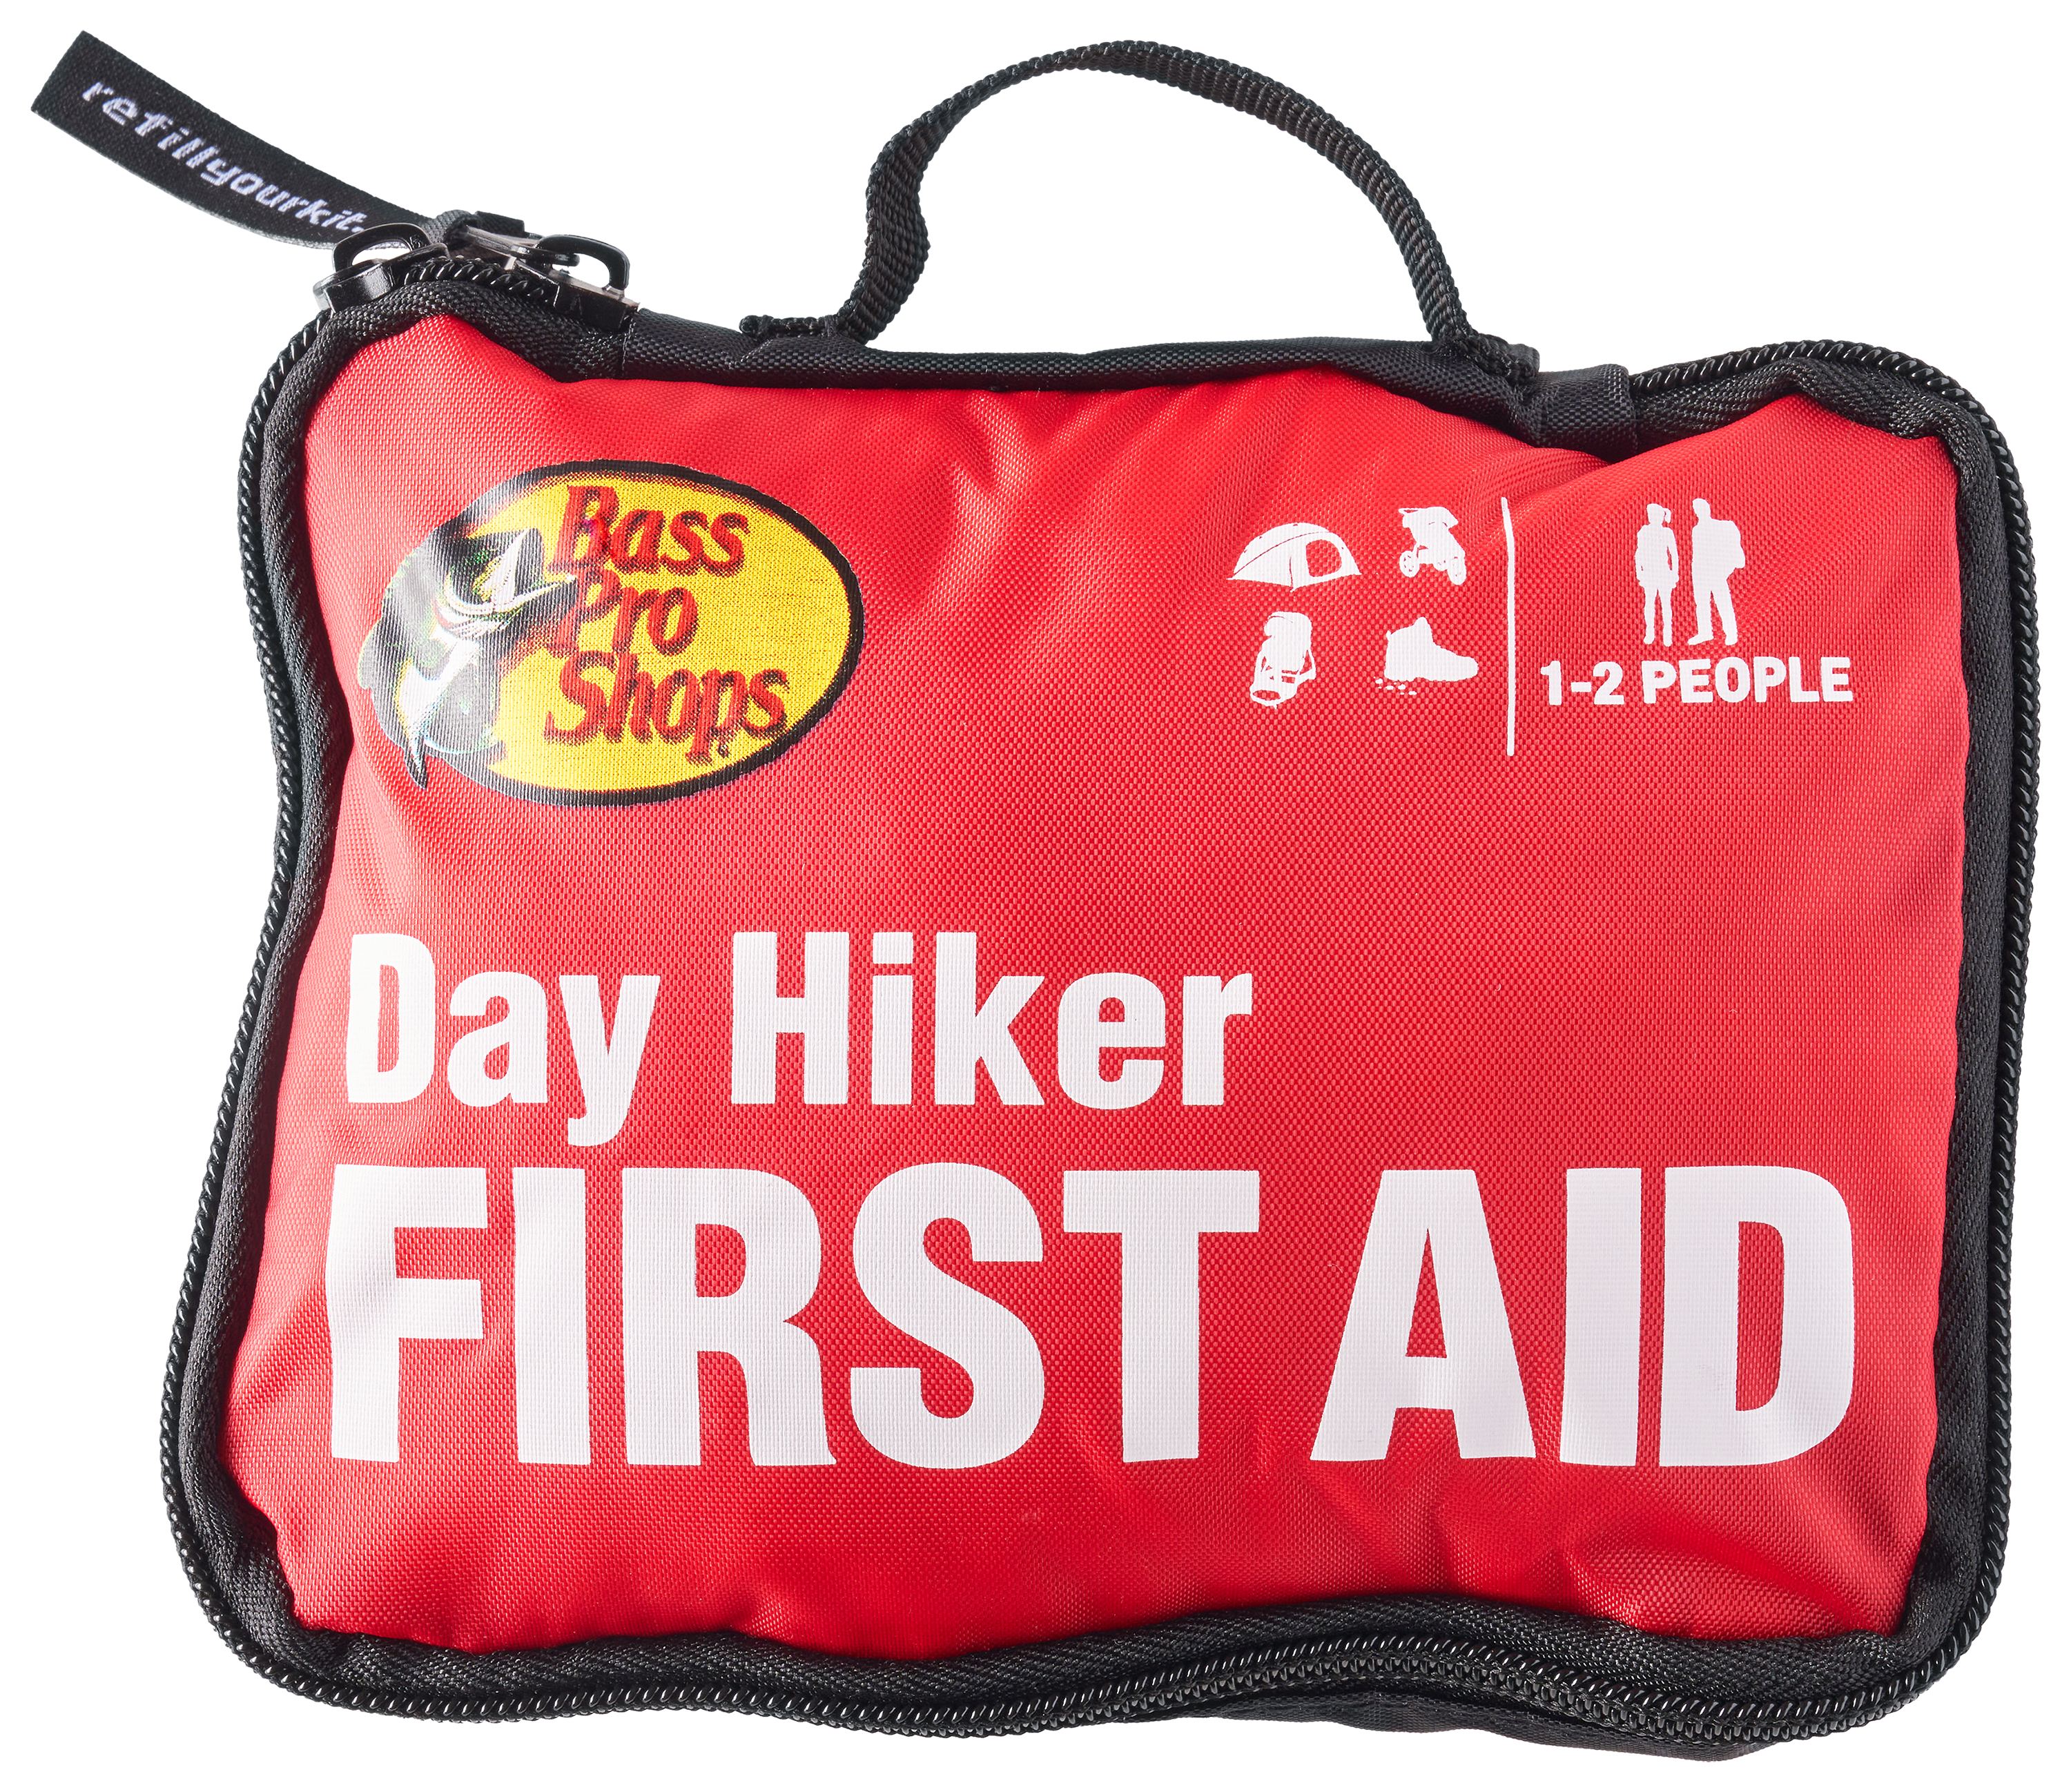 Bass Pro Shops Day Hiker First Aid Kit